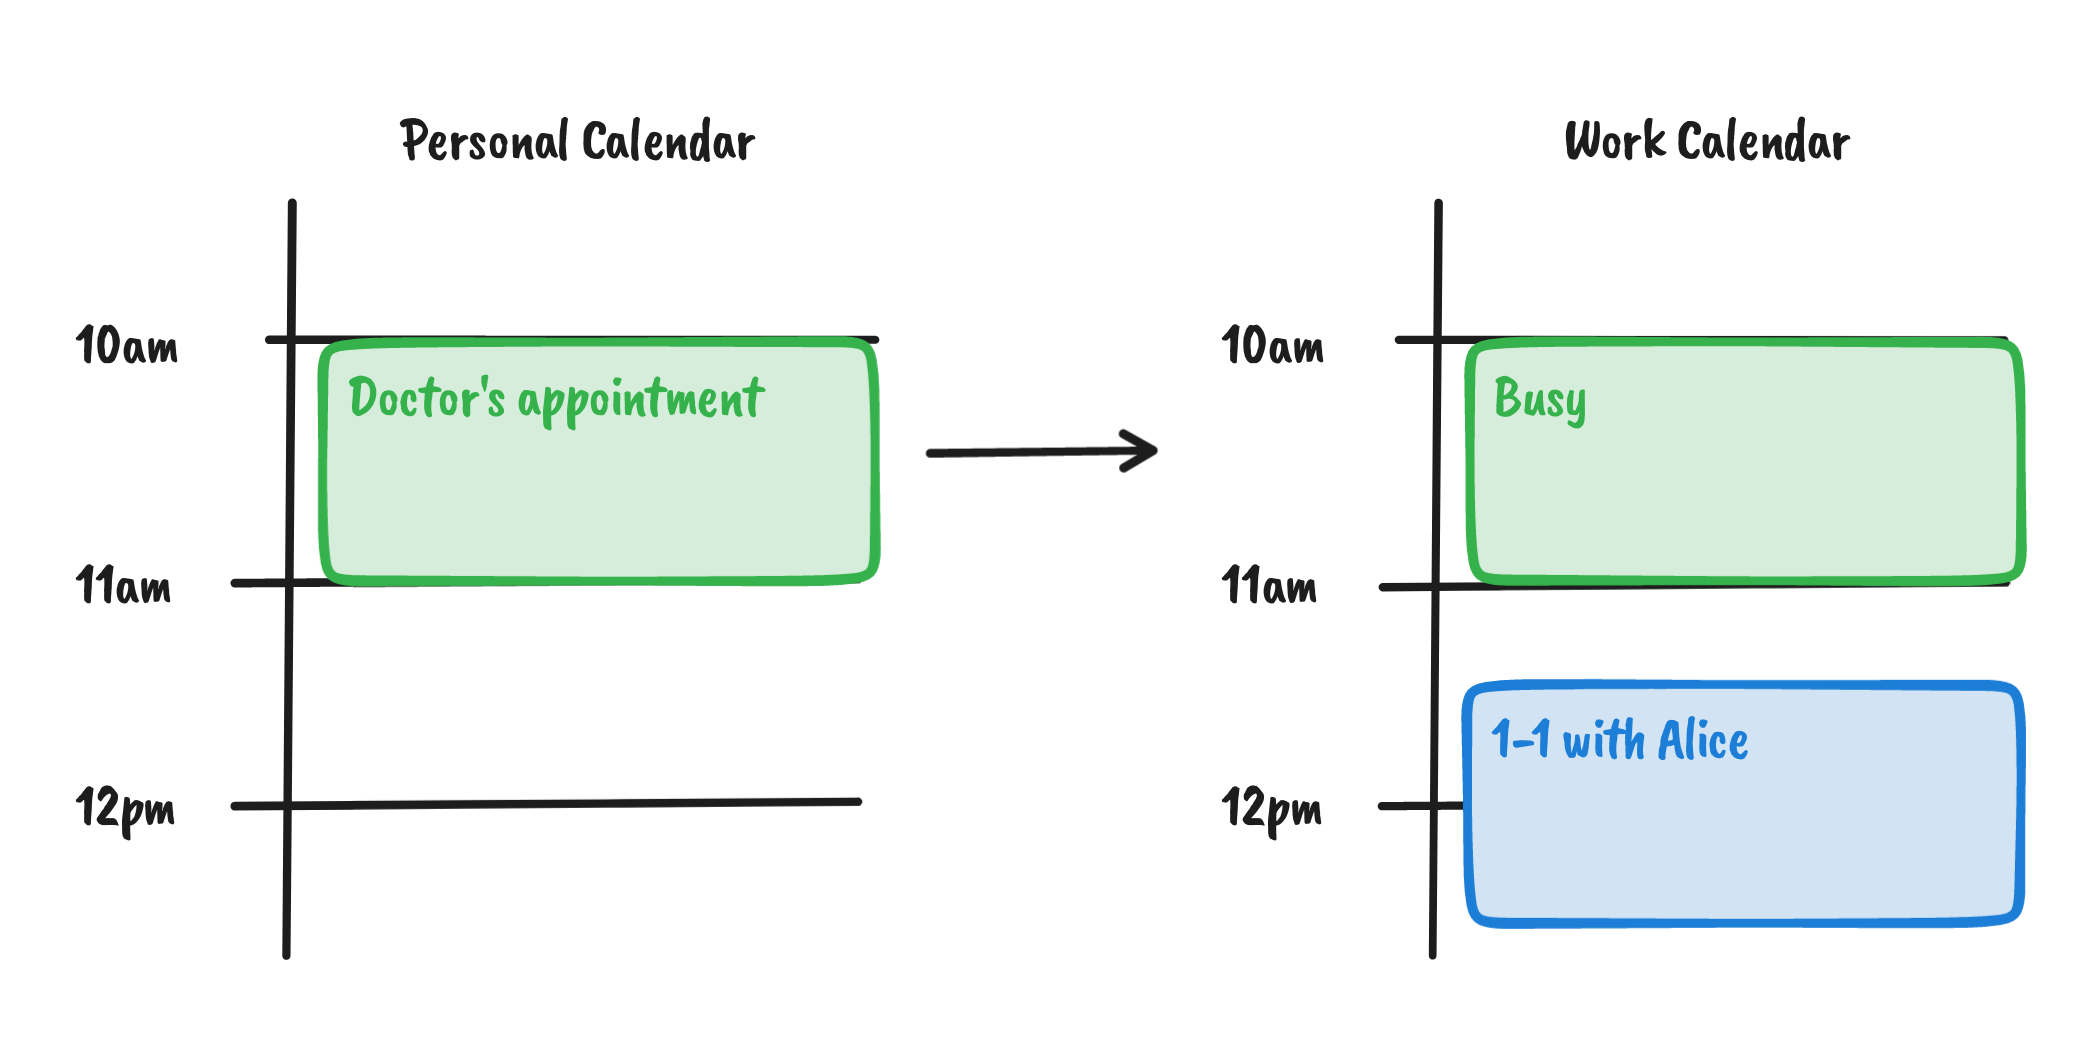 Example of copying availability of an event from a personal calendar to a work calendar